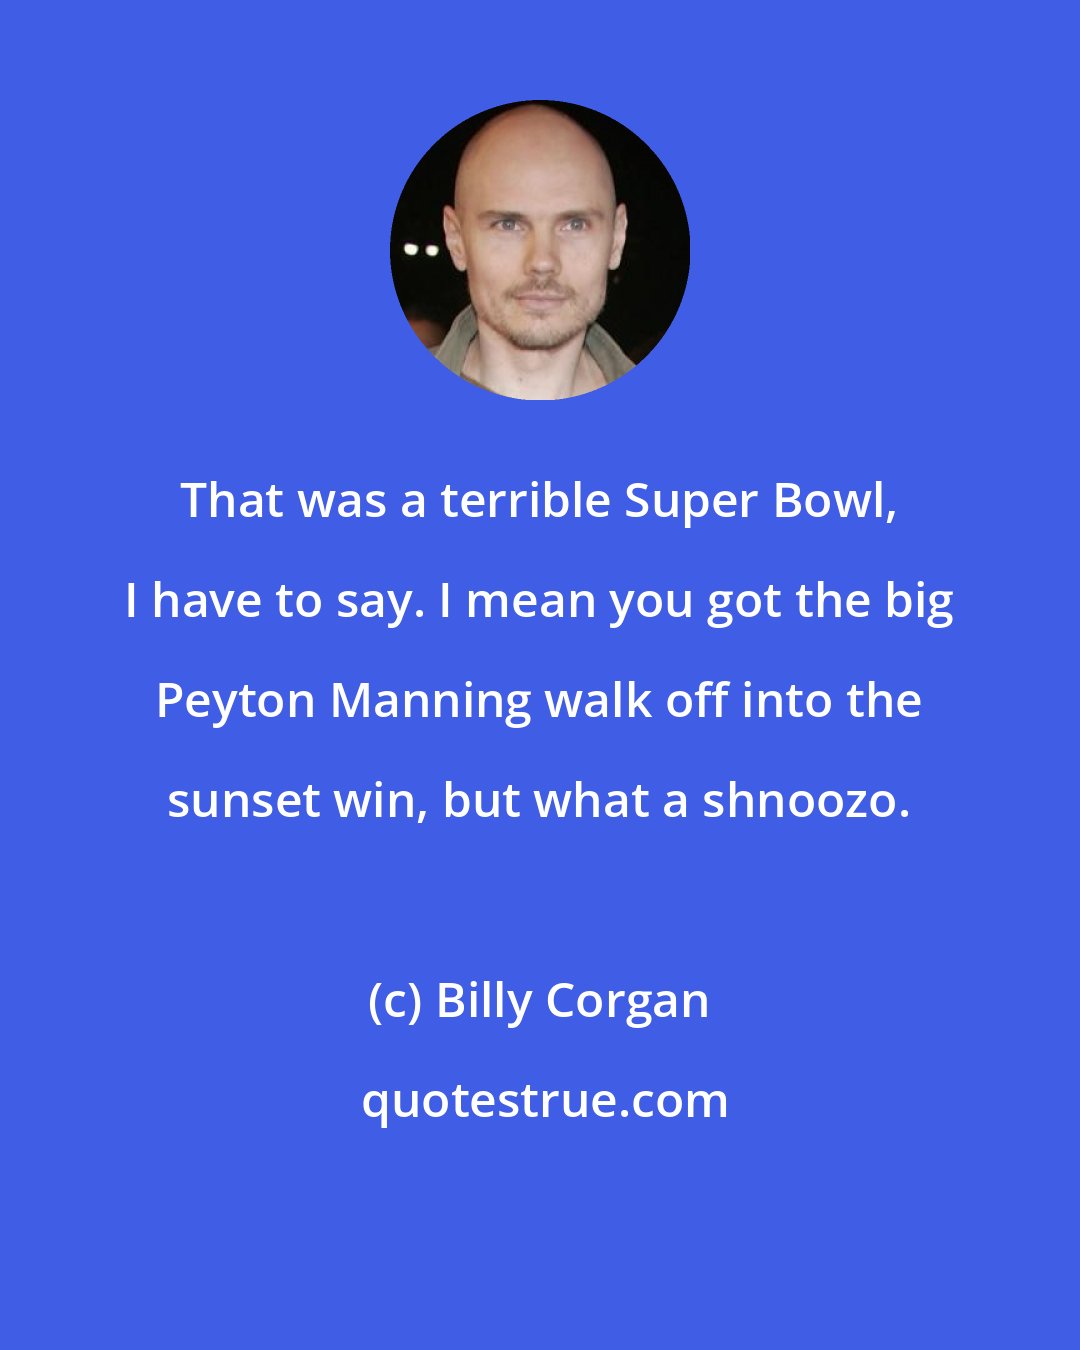 Billy Corgan: That was a terrible Super Bowl, I have to say. I mean you got the big Peyton Manning walk off into the sunset win, but what a shnoozo.